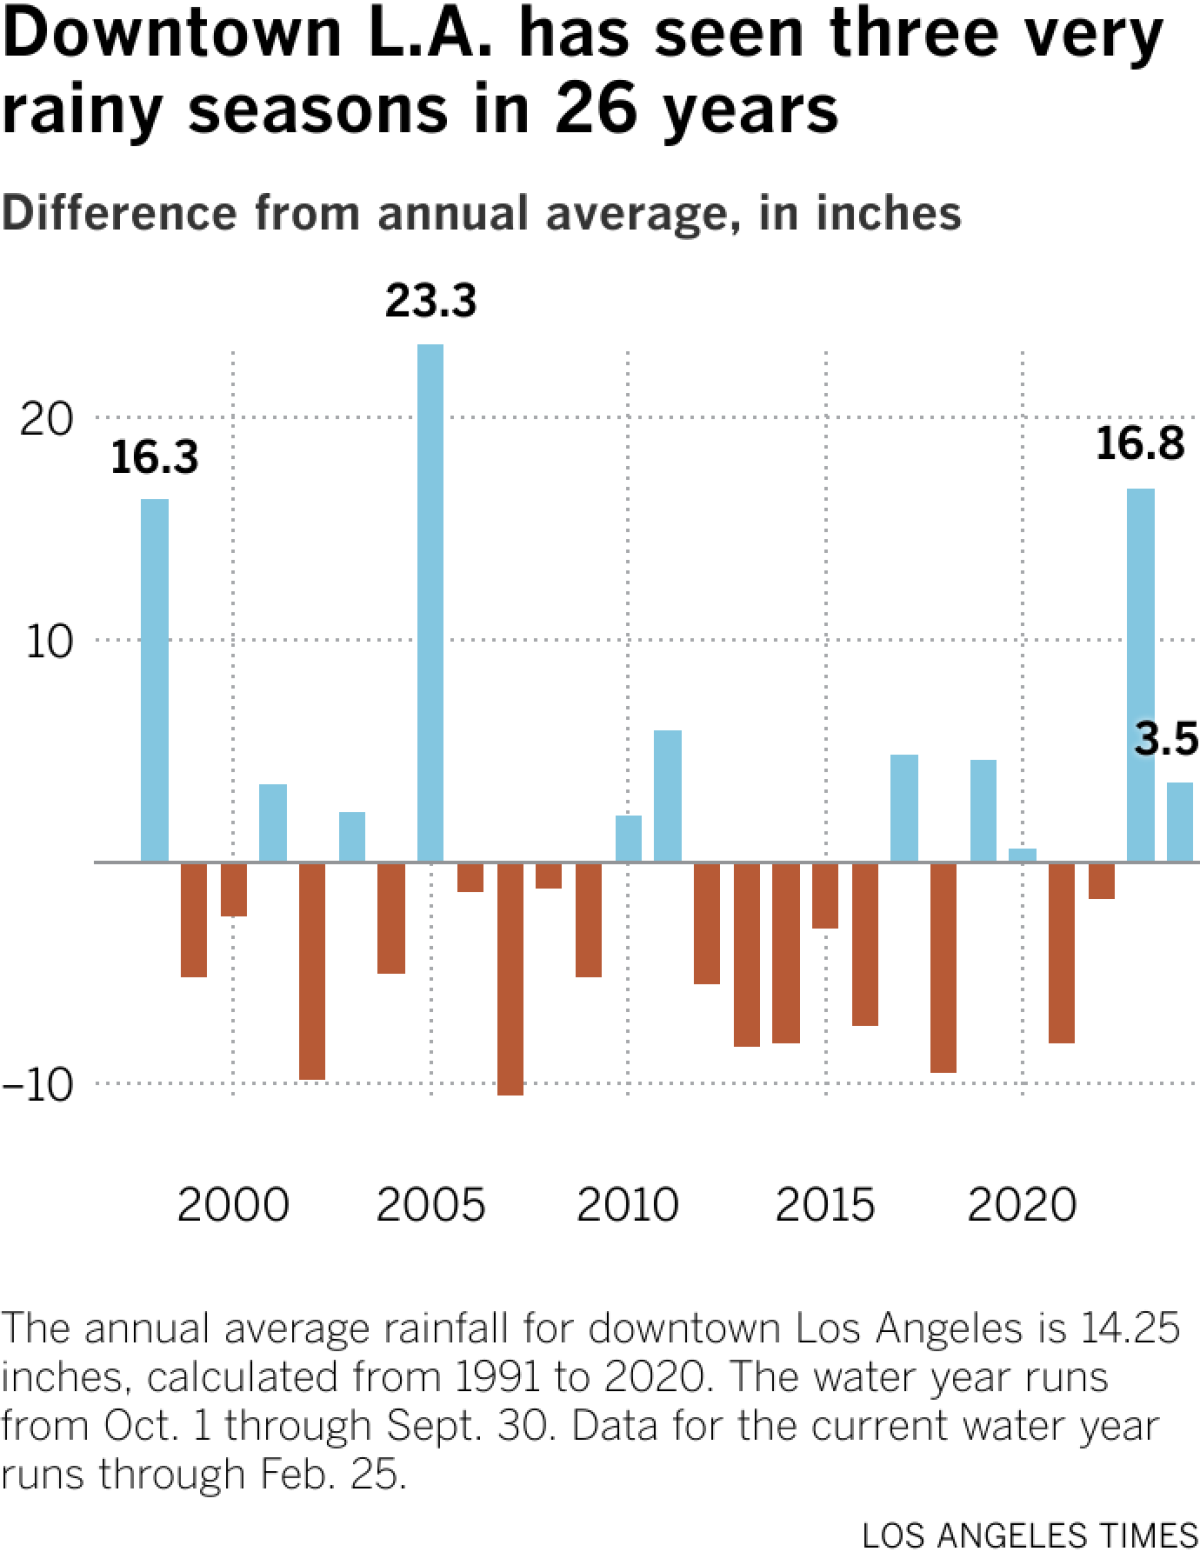 Bar chart shows rainfall in terms of difference from average in downtown L.A. In 1998, downtown saw more 16.3 inches of rain than average. In 2005, the difference was 23.3 inches. In 2023, it was 16.8.